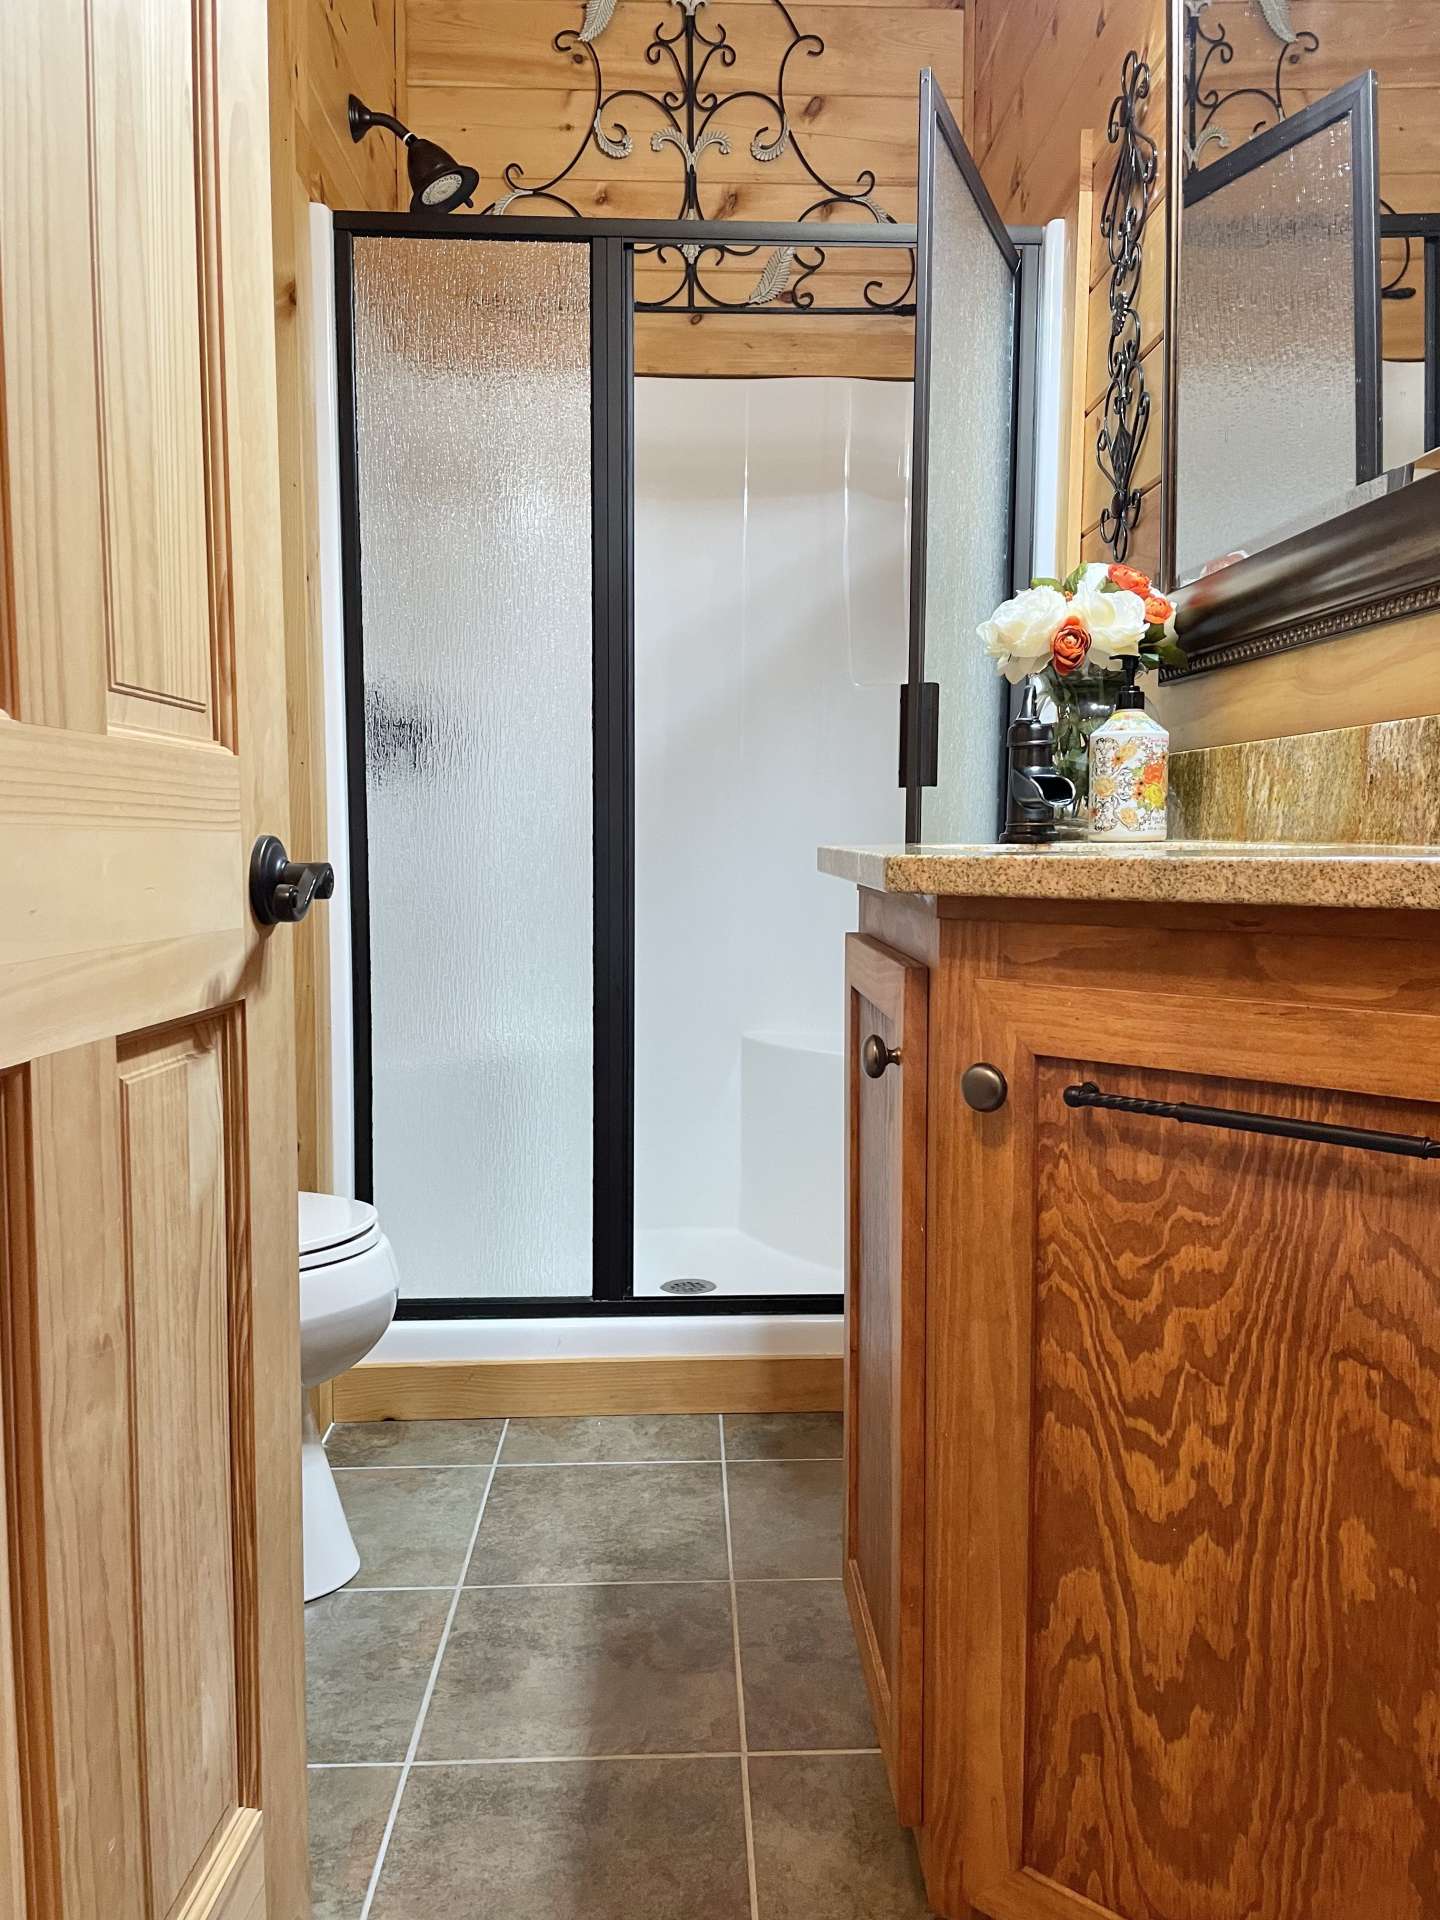 Upper level bath with granite countertop and glass shower doors.